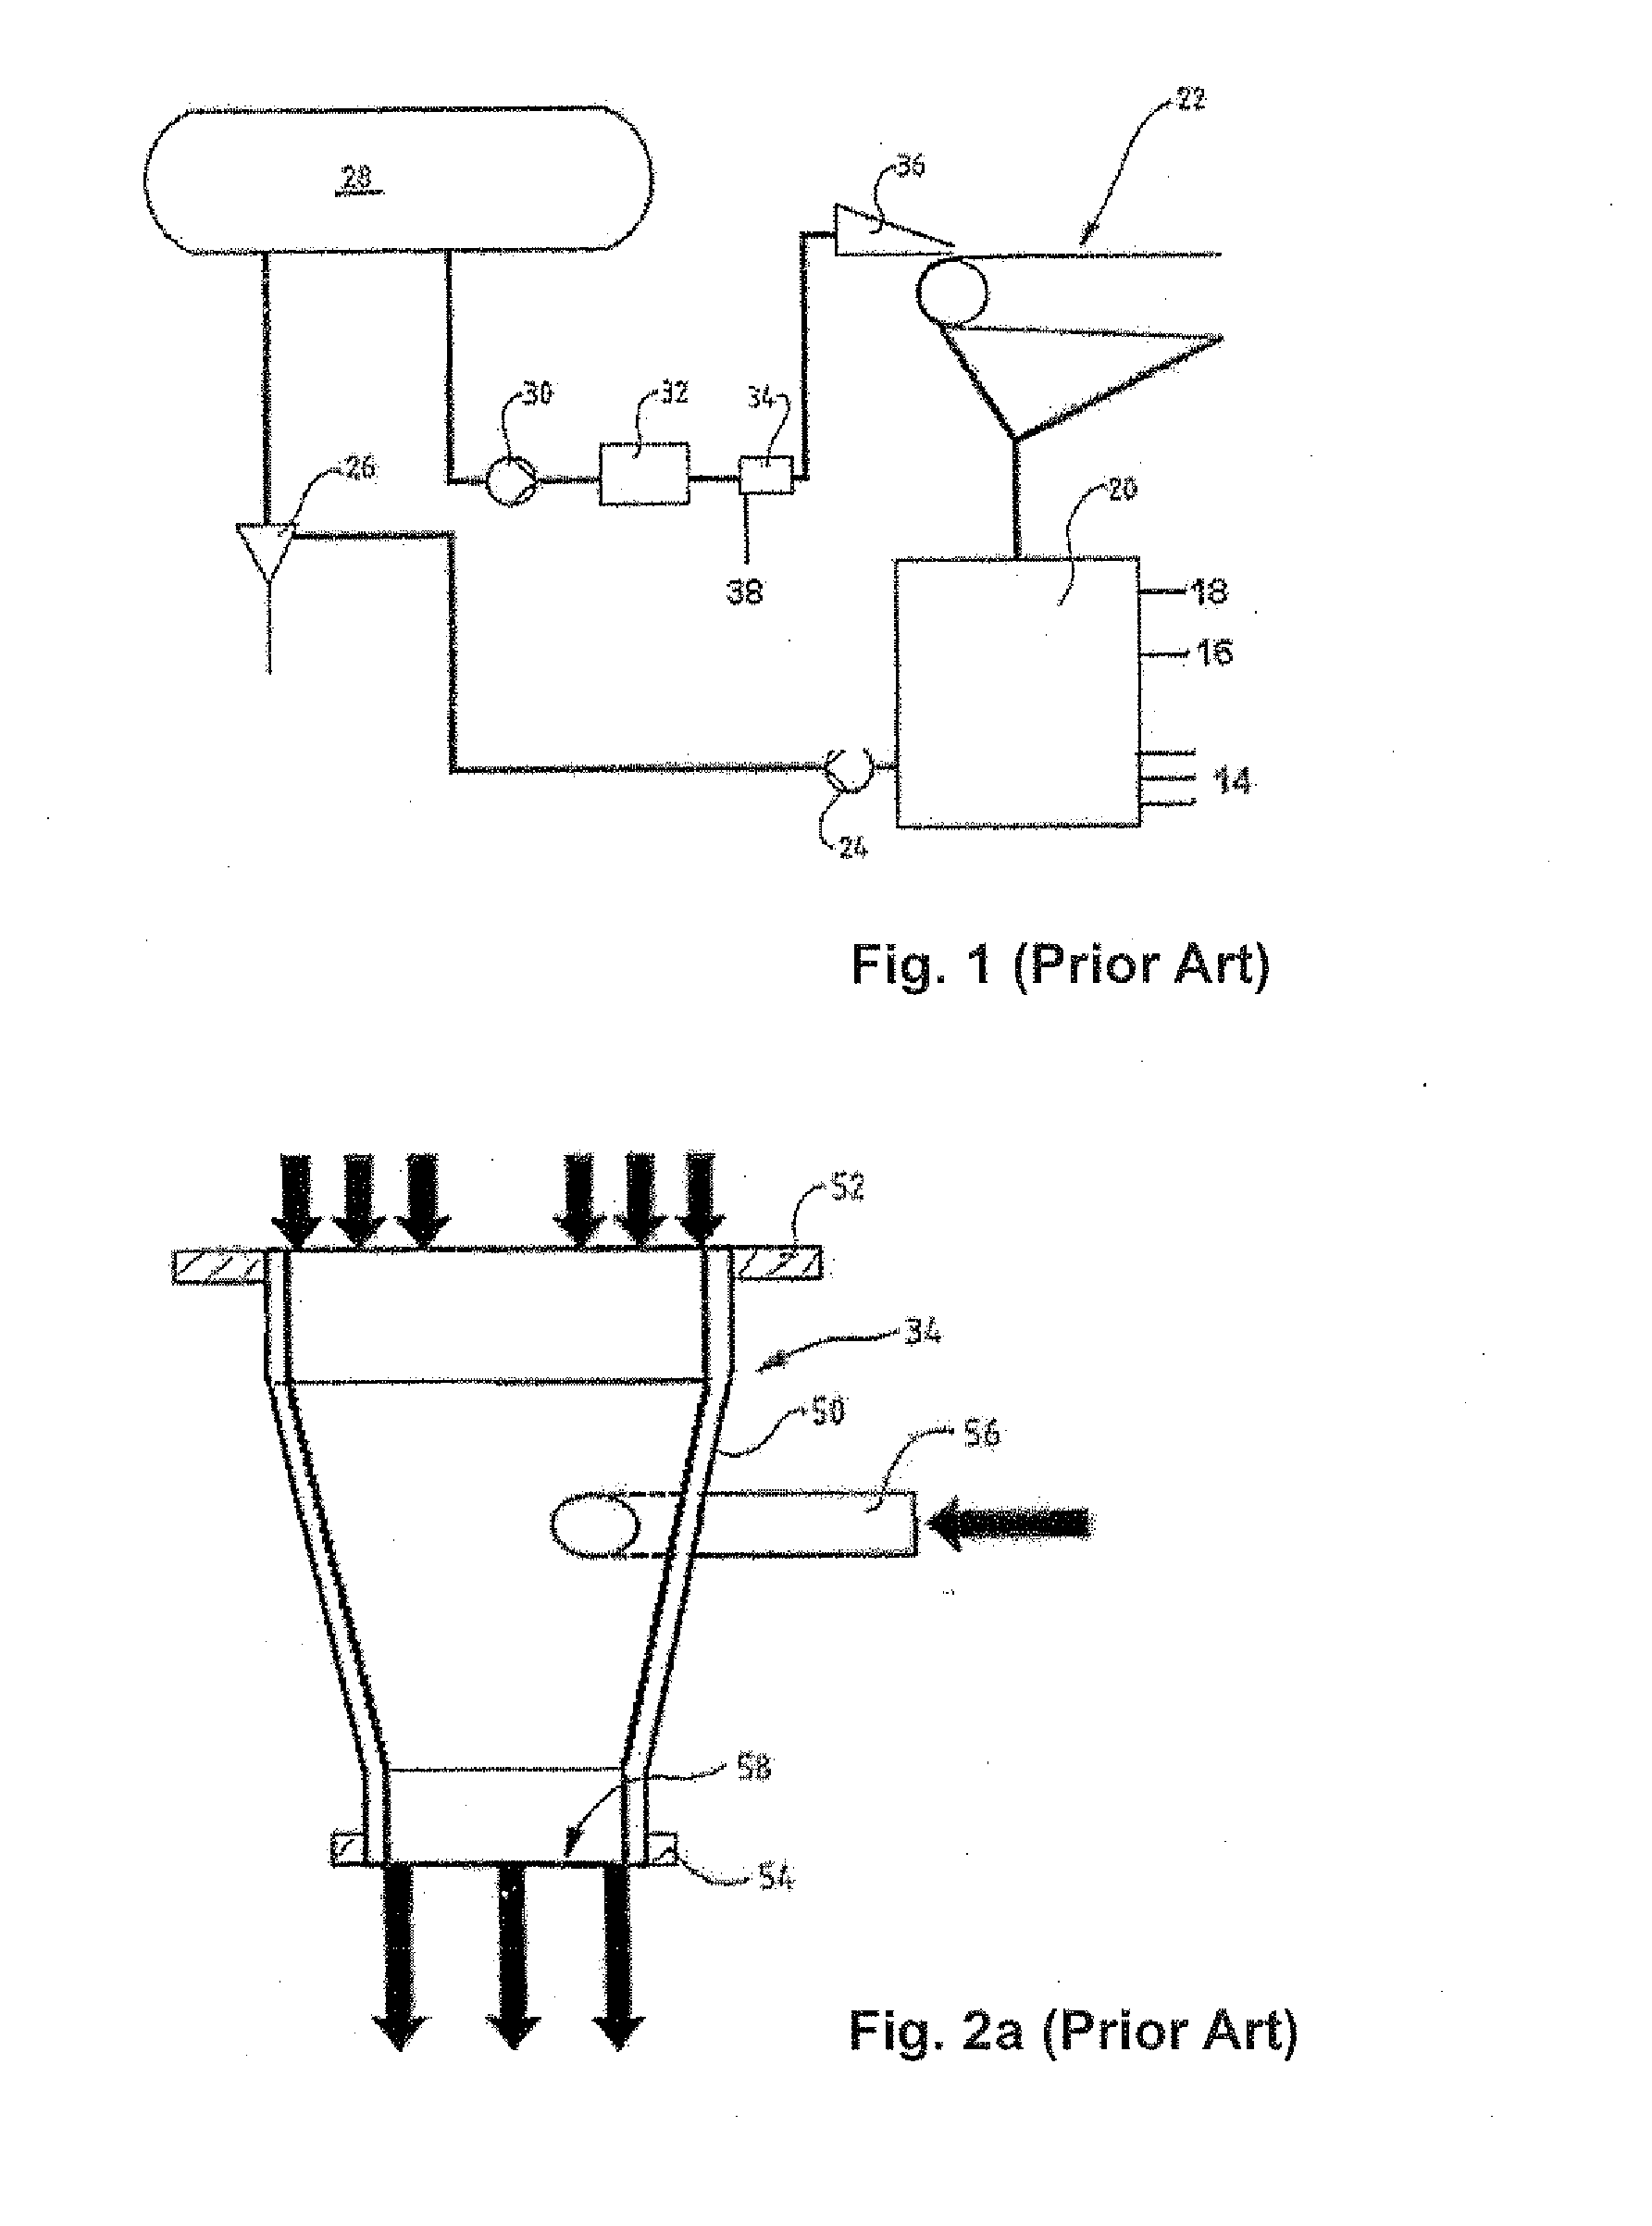 Method and apparatus for feeding chemicals into a process liquid flow